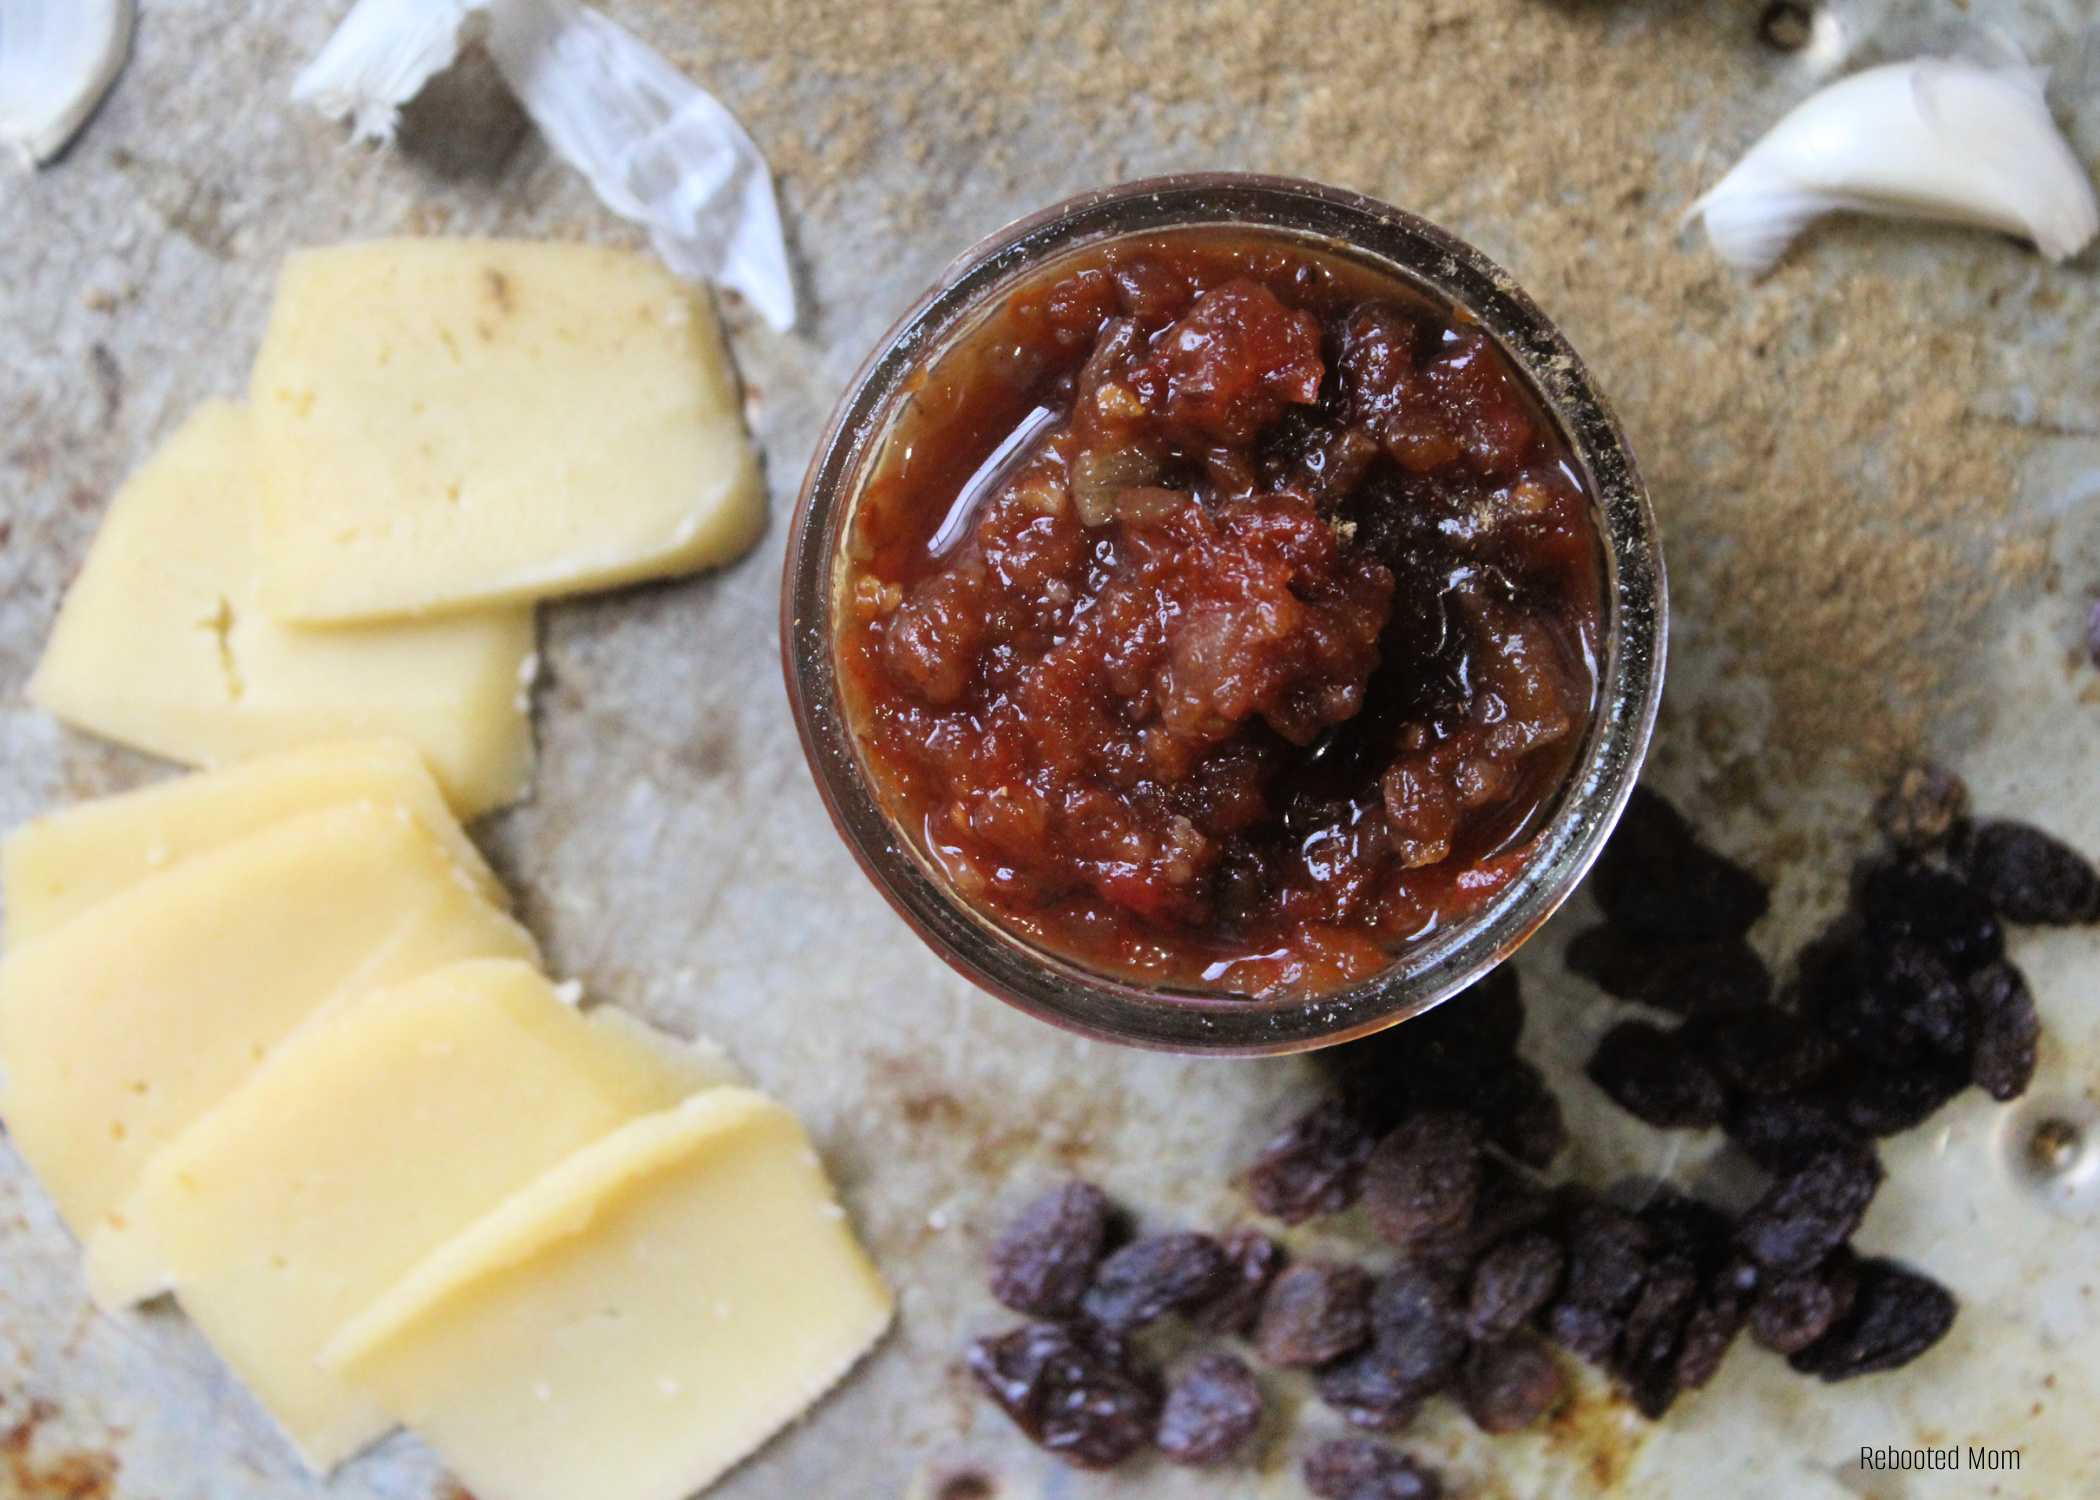 Easy and delicious Tomato Chutney recipe - the perfect way to use an abundance of garden tomatoes in a hurry and perfect condiment on meat, veggies, eggs and more! You will NEVER want to run out!